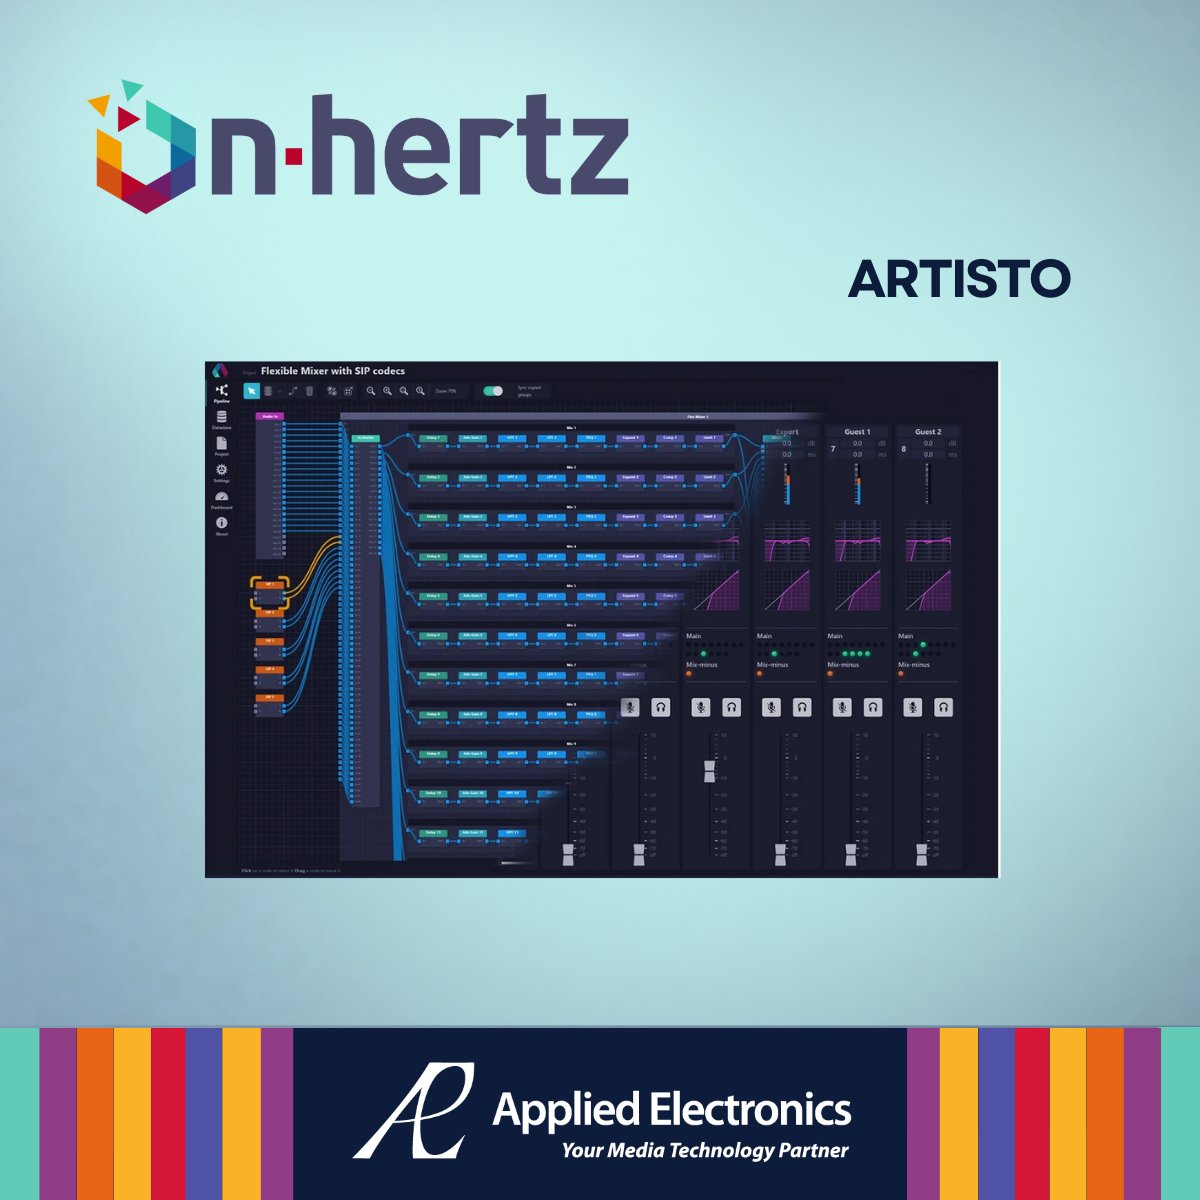 Introducing Artisto by On-Hertz: The Ultimate Audio-First Production Software for Broadcast & Media! 🎙️
Learn more and book a demo on our website: hubs.li/Q02z4MS10

#BroadcastTechnology #AudioProduction #Innovation #OnHertz #Artisto #FutureOfAudio #AppliedElectronics